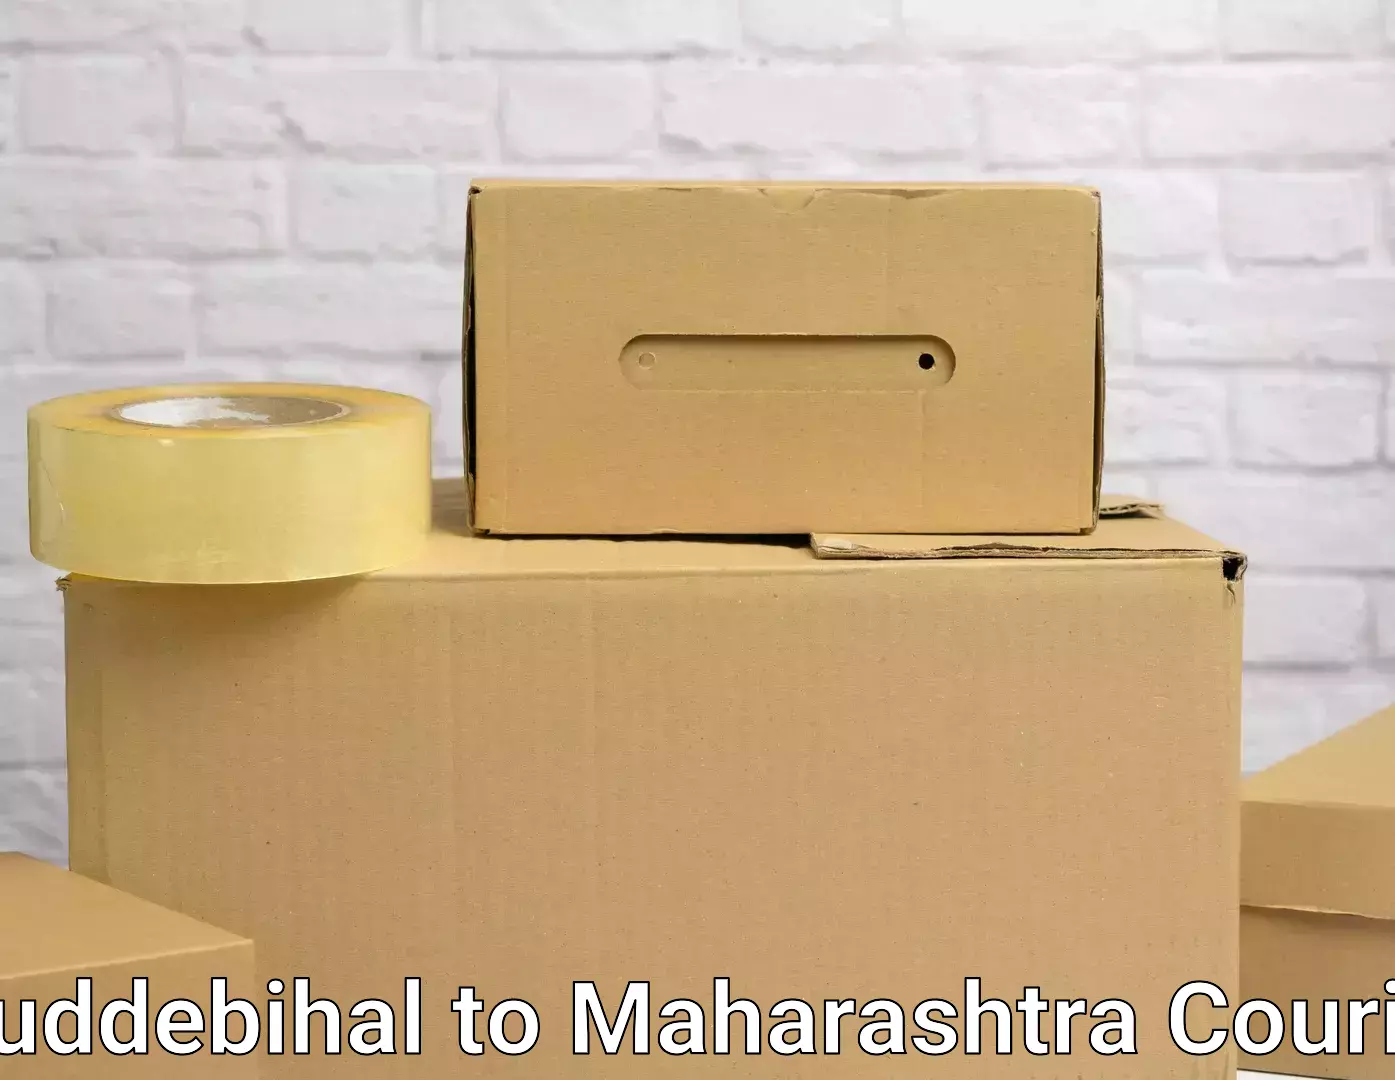 Residential moving experts Muddebihal to Udgir